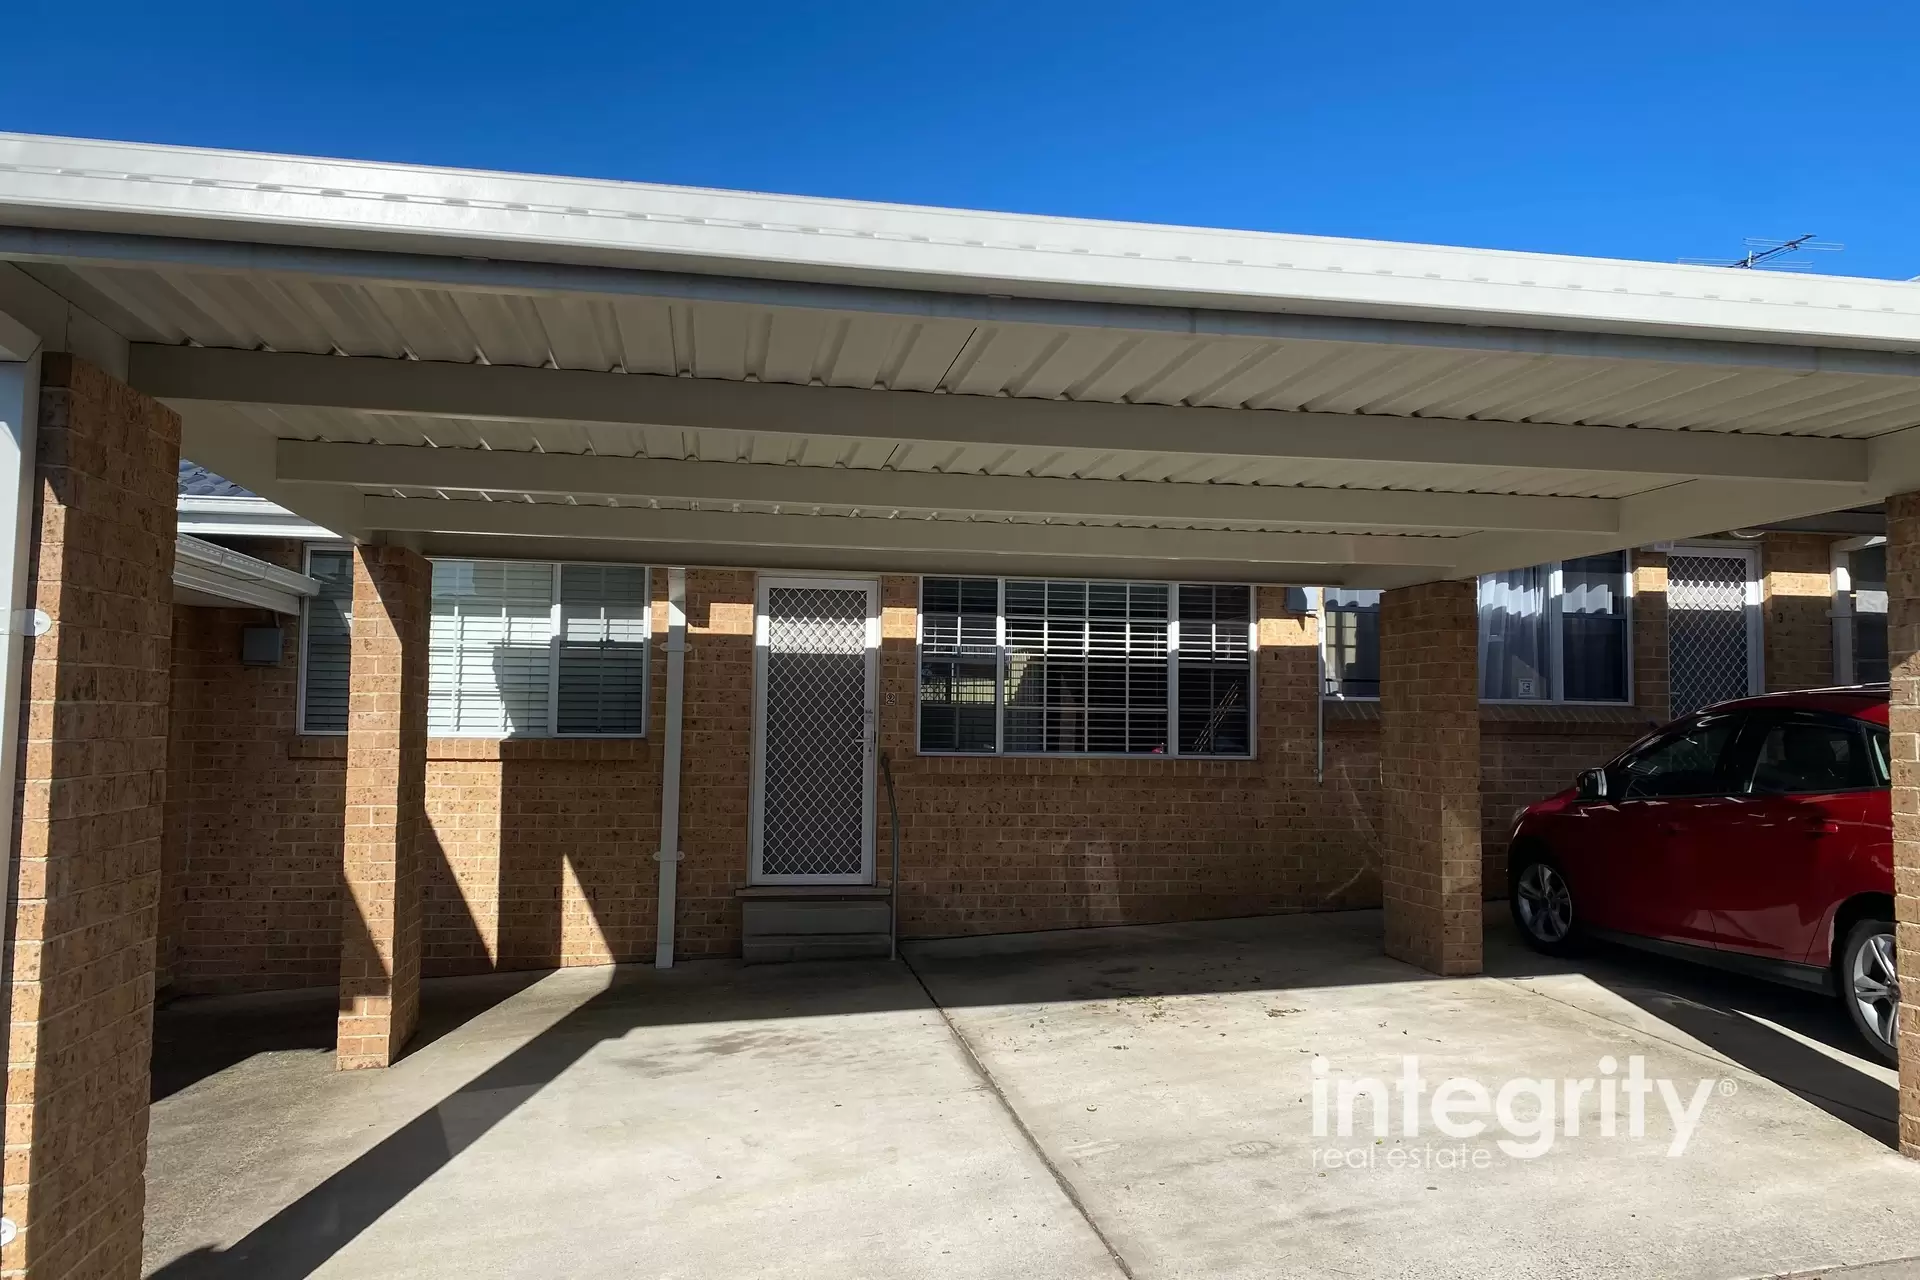 2/19 Coomea Street, Bomaderry Leased by Integrity Real Estate